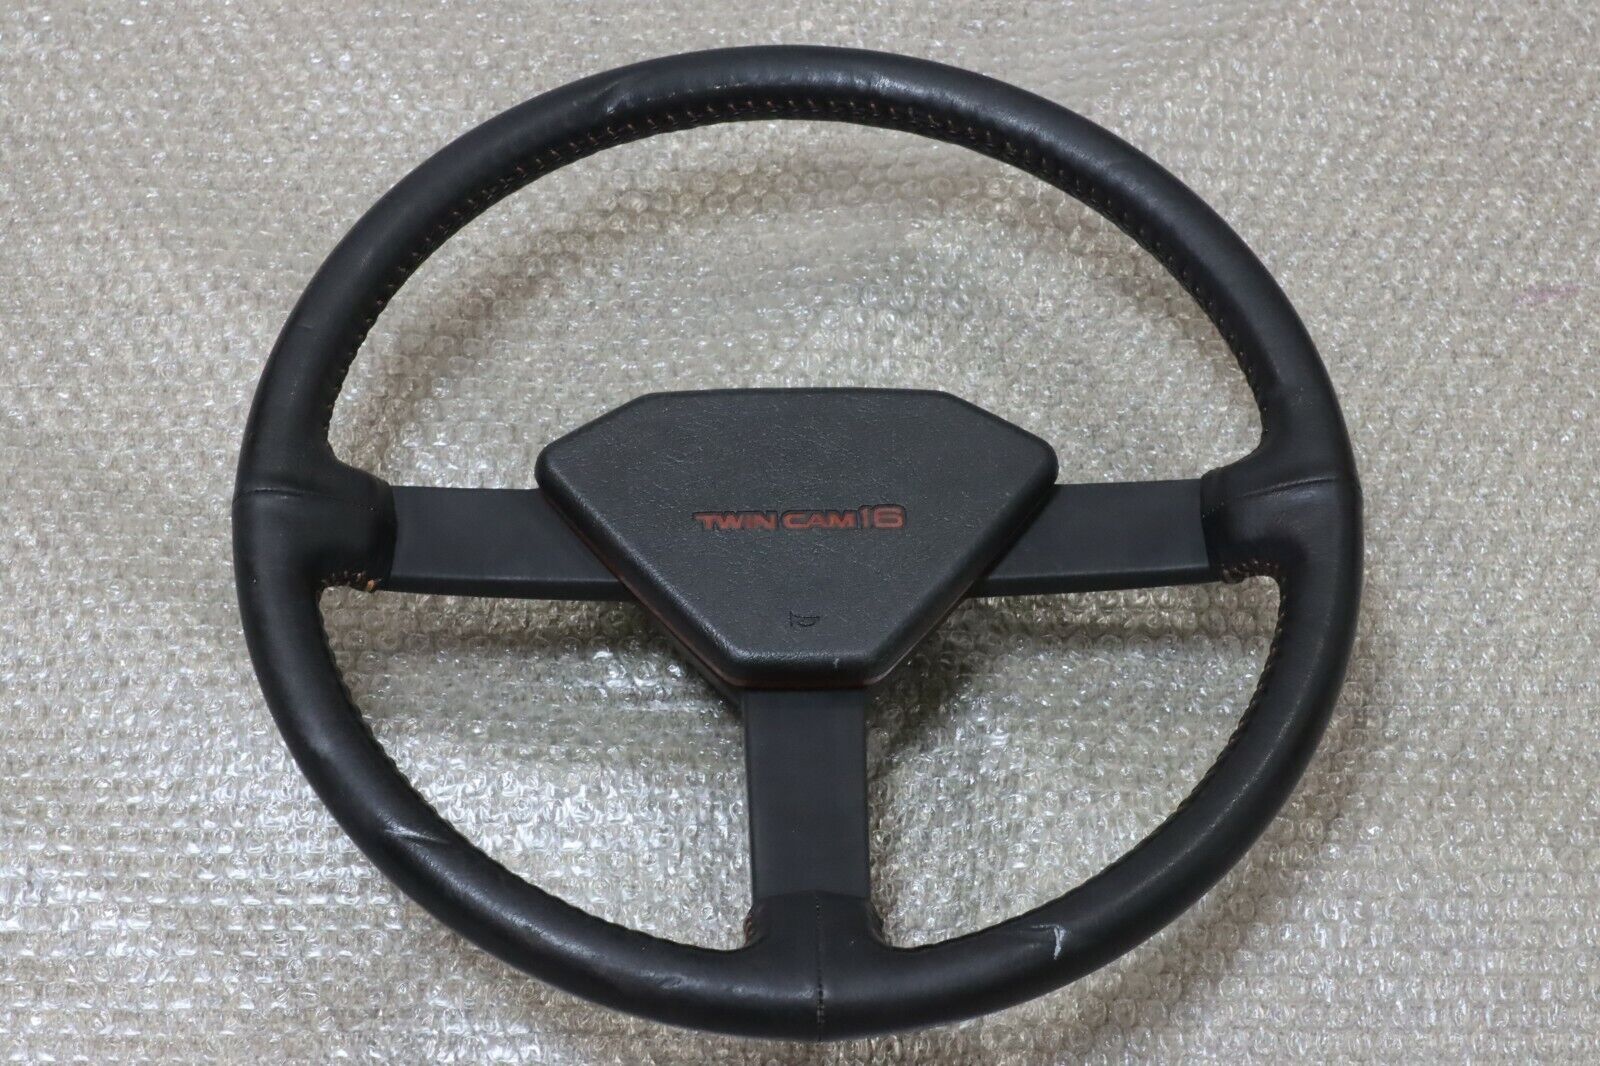 JDM Toyota AA63 Celica Carina GT-R Leather Steering wheel 4AGE 4A-GE OEM RARE